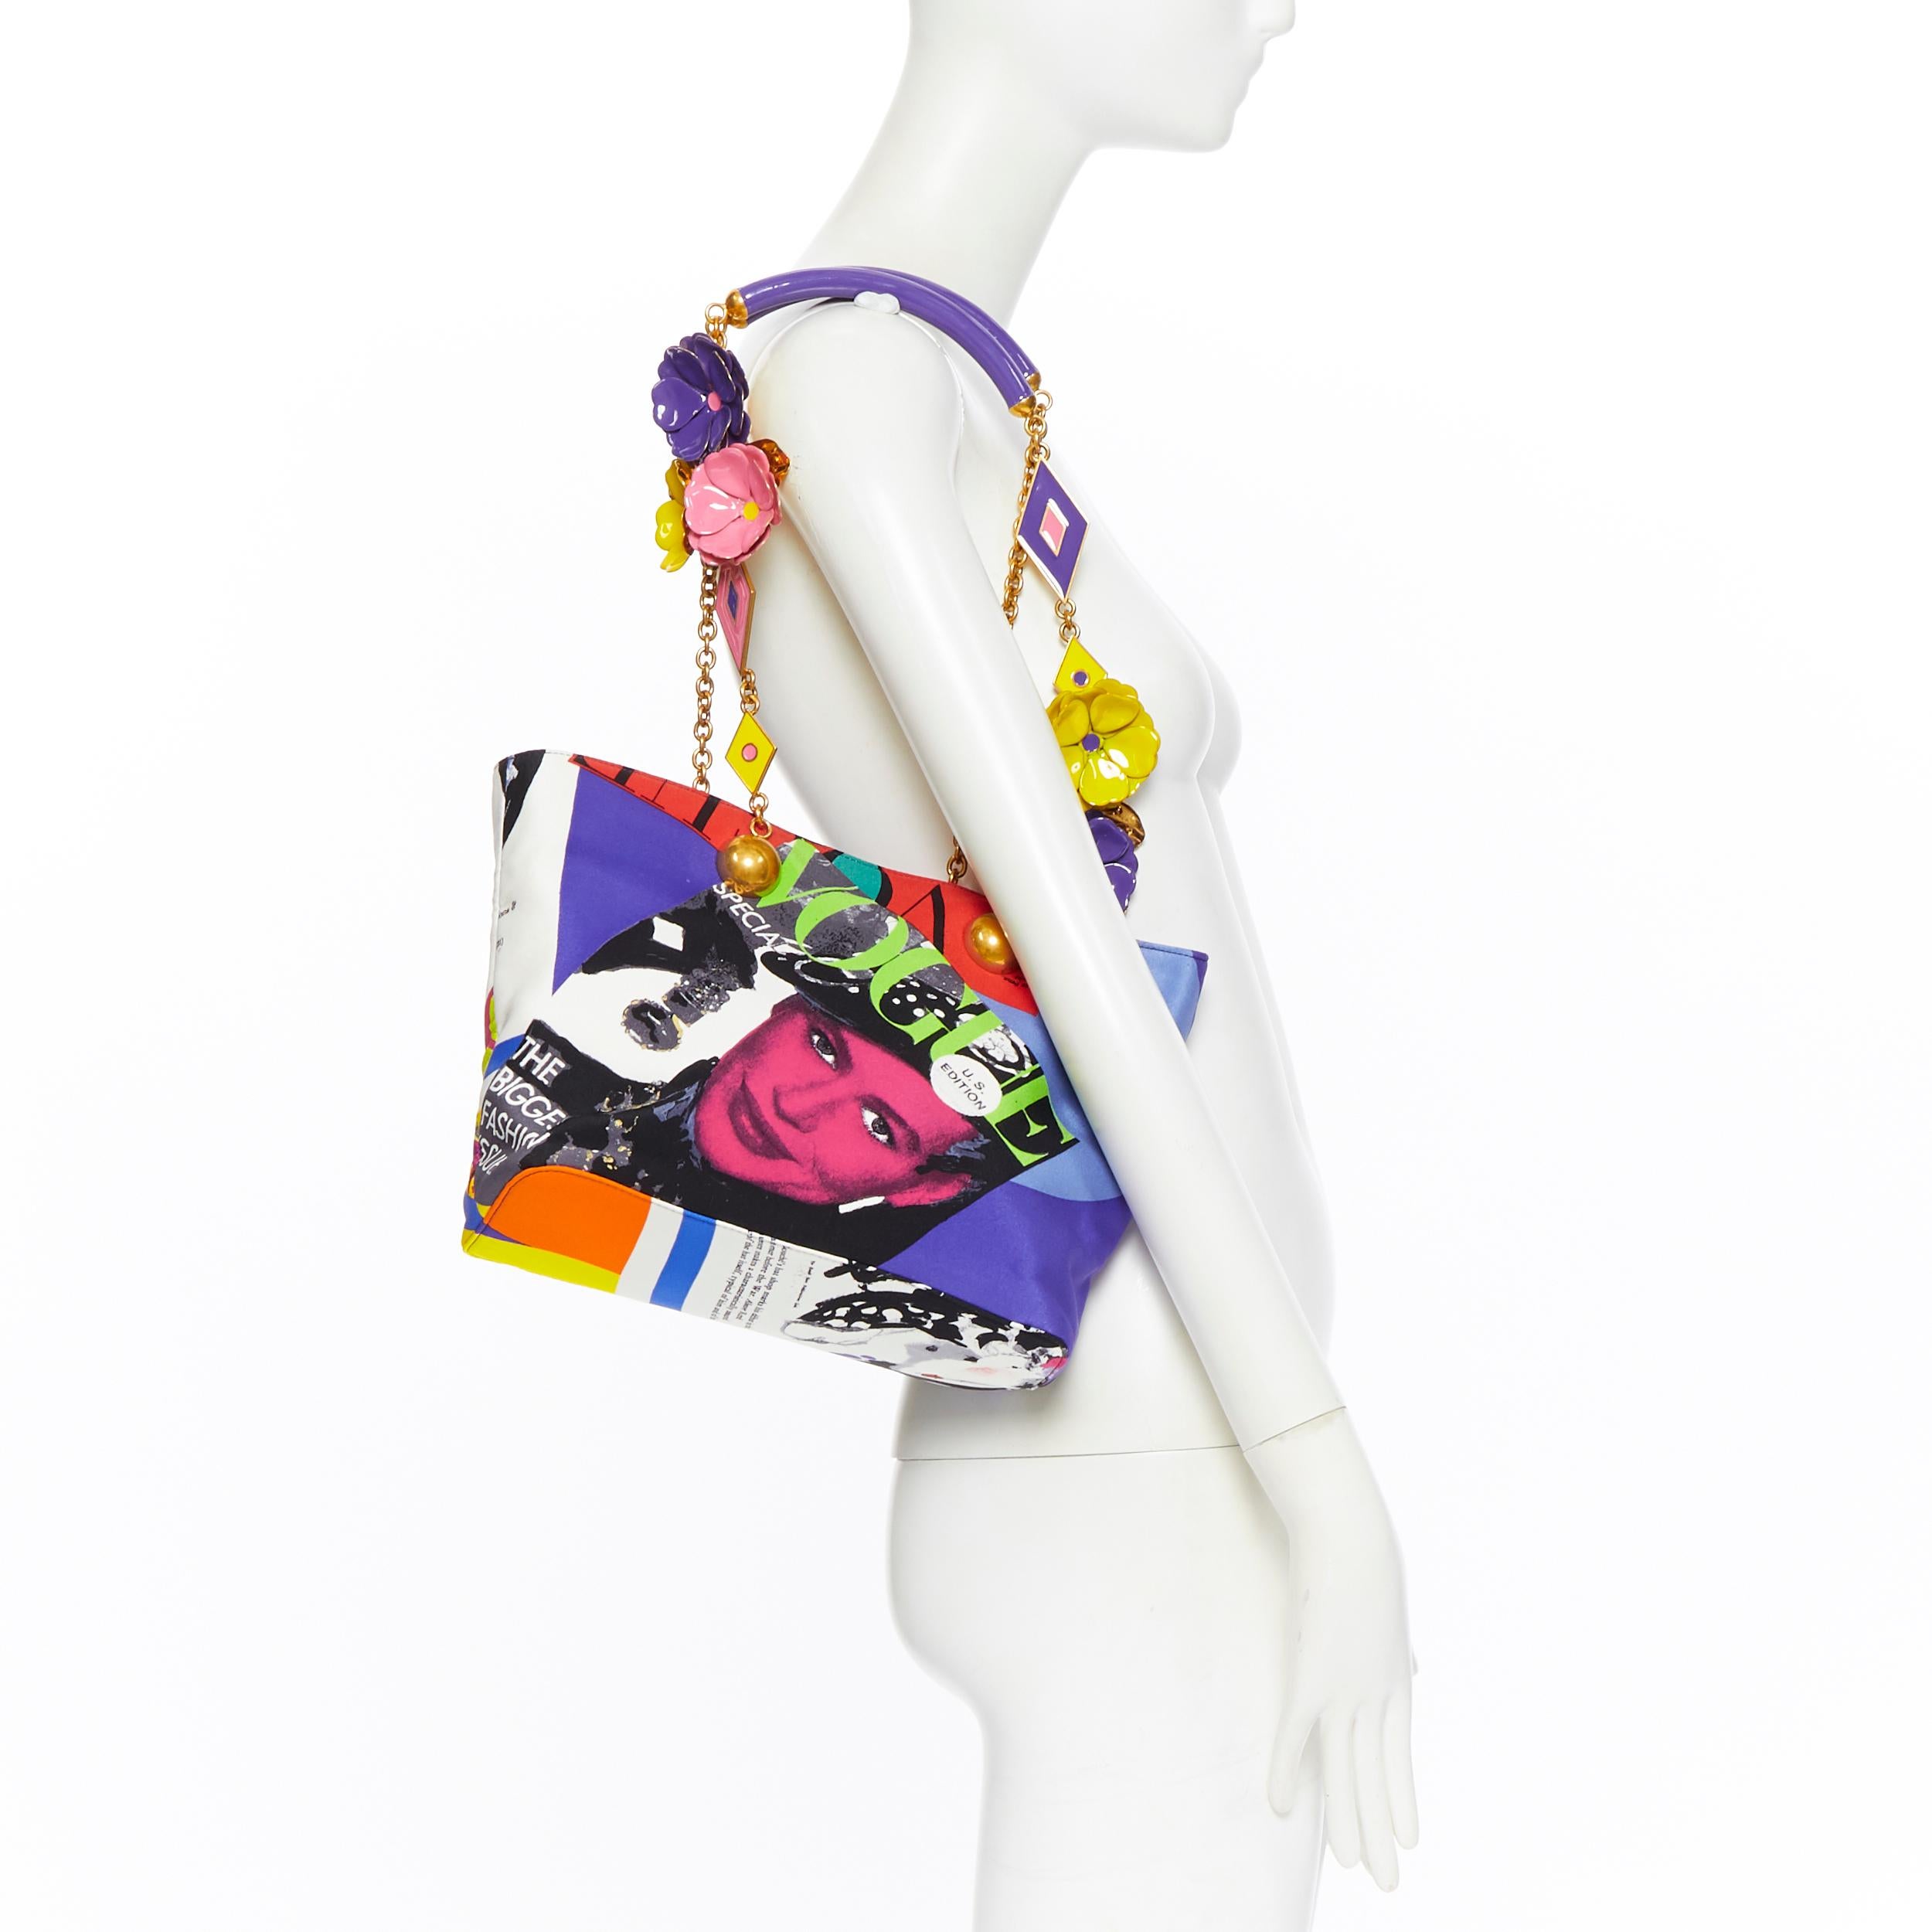 new VERSACE SS18 Tribute 1990 Pop Art Vogue print 3D enamel flower chain tote
Brand: Versace
Designer: Donatella Versace
Collection: Spring Summer 2018
Model Name / Style: Vogue tote
Material: Fabric
Color: Multicolour
Pattern: Abstract; vogue